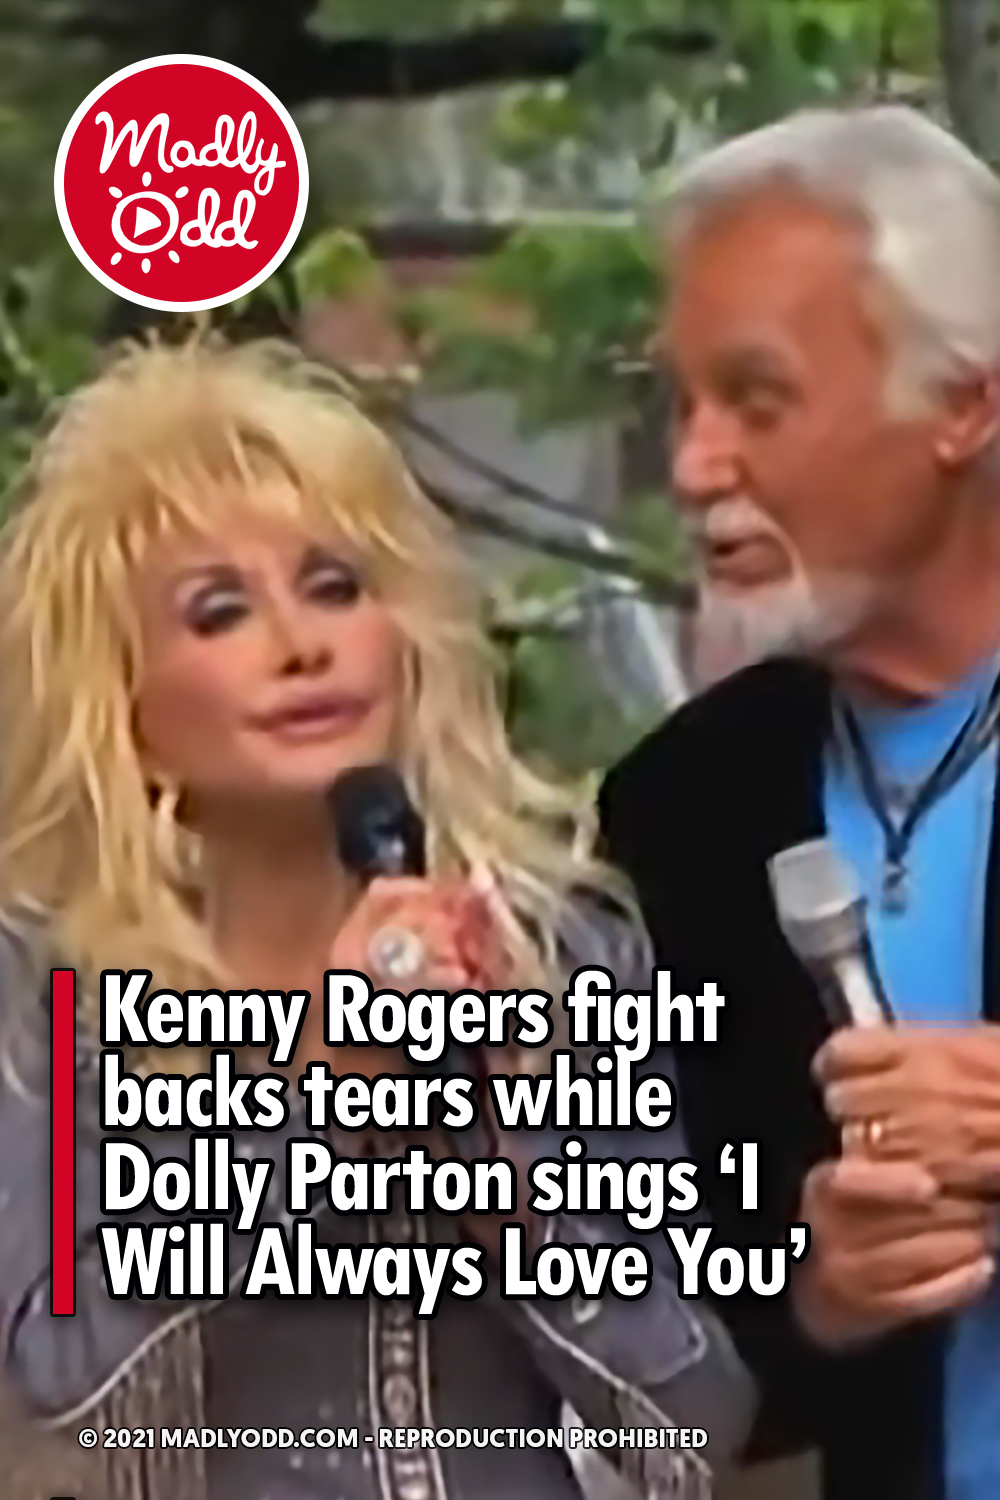 Kenny Rogers fight backs tears while Dolly Parton sings ‘I Will Always Love You’